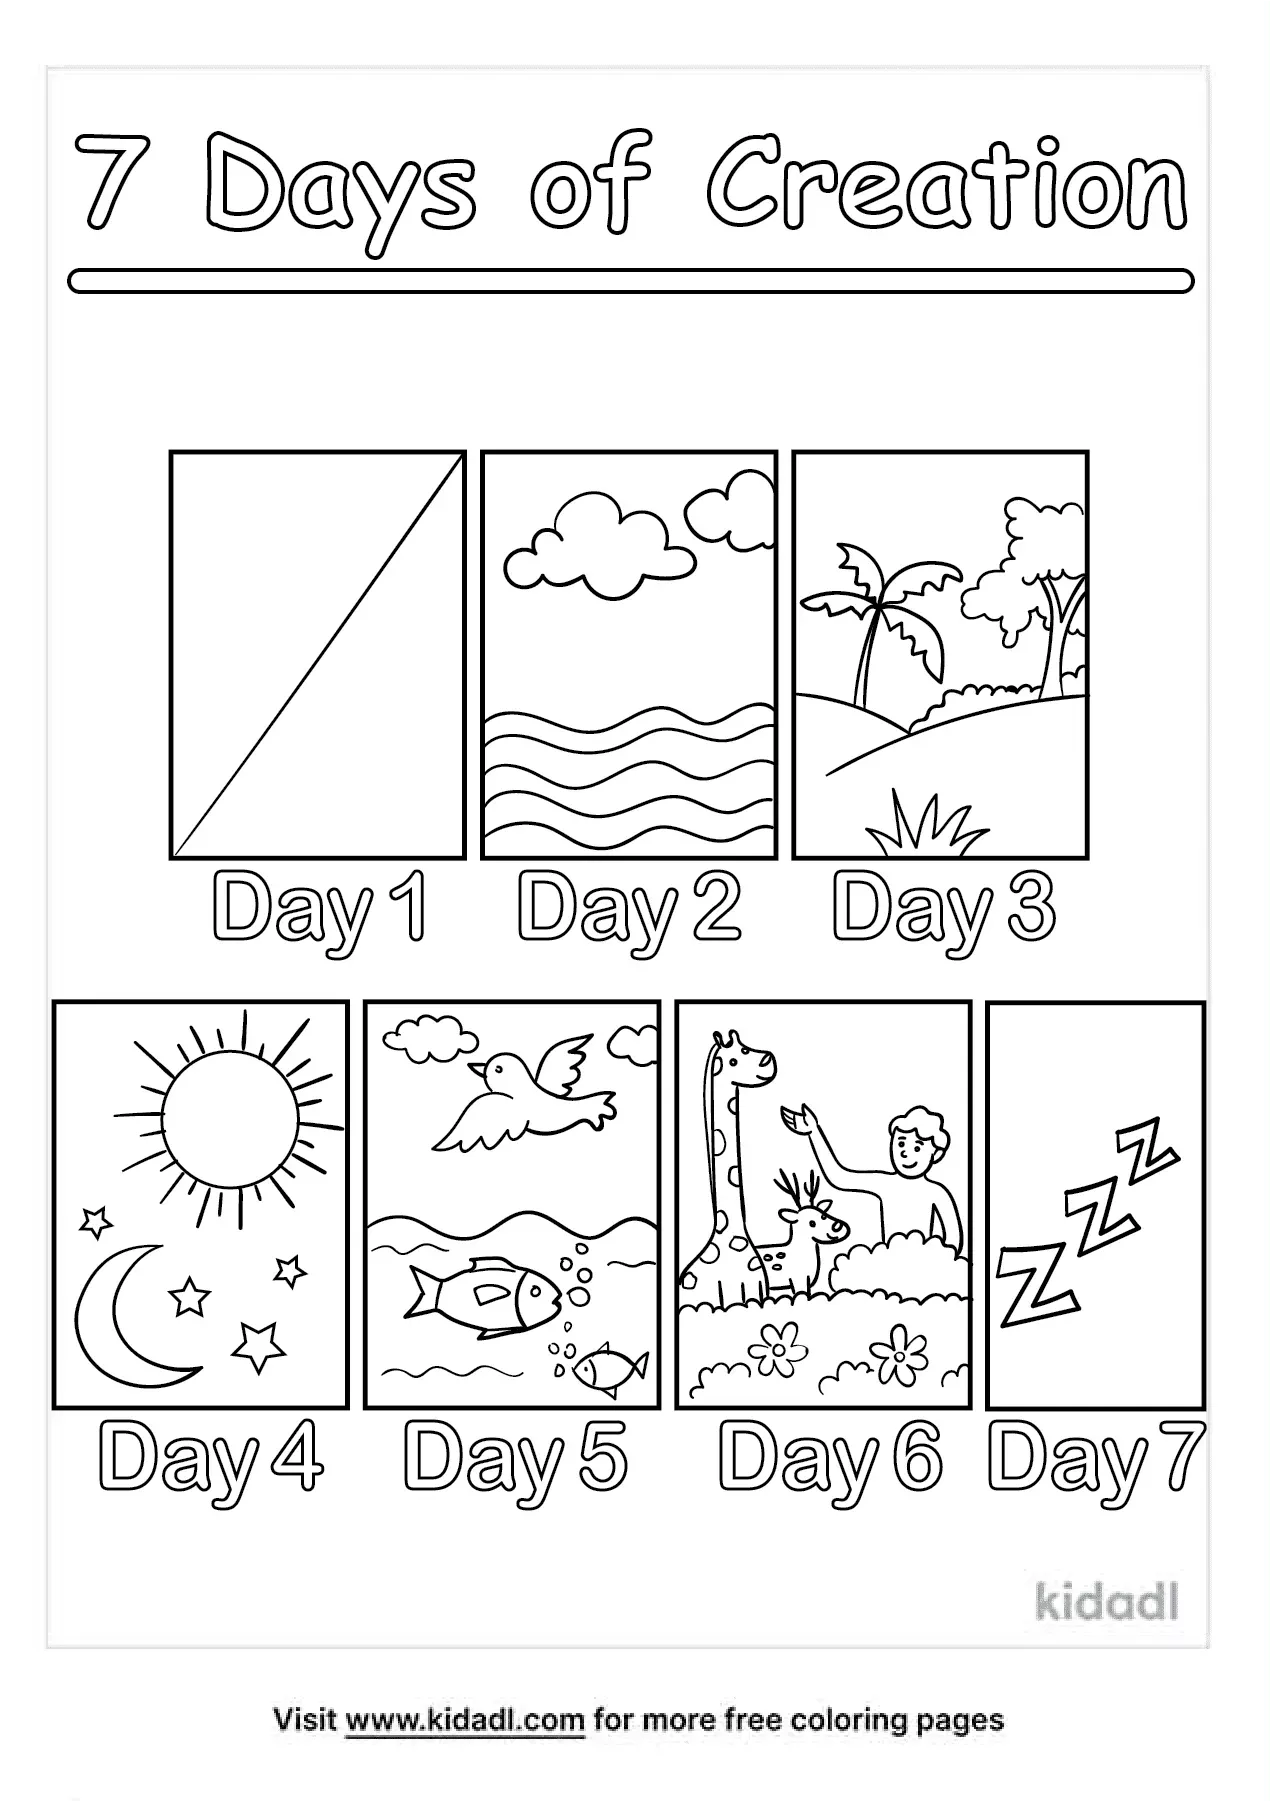 Free days of creation coloring page coloring page printables kidadl days of creation sunday school coloring pages creation coloring pages